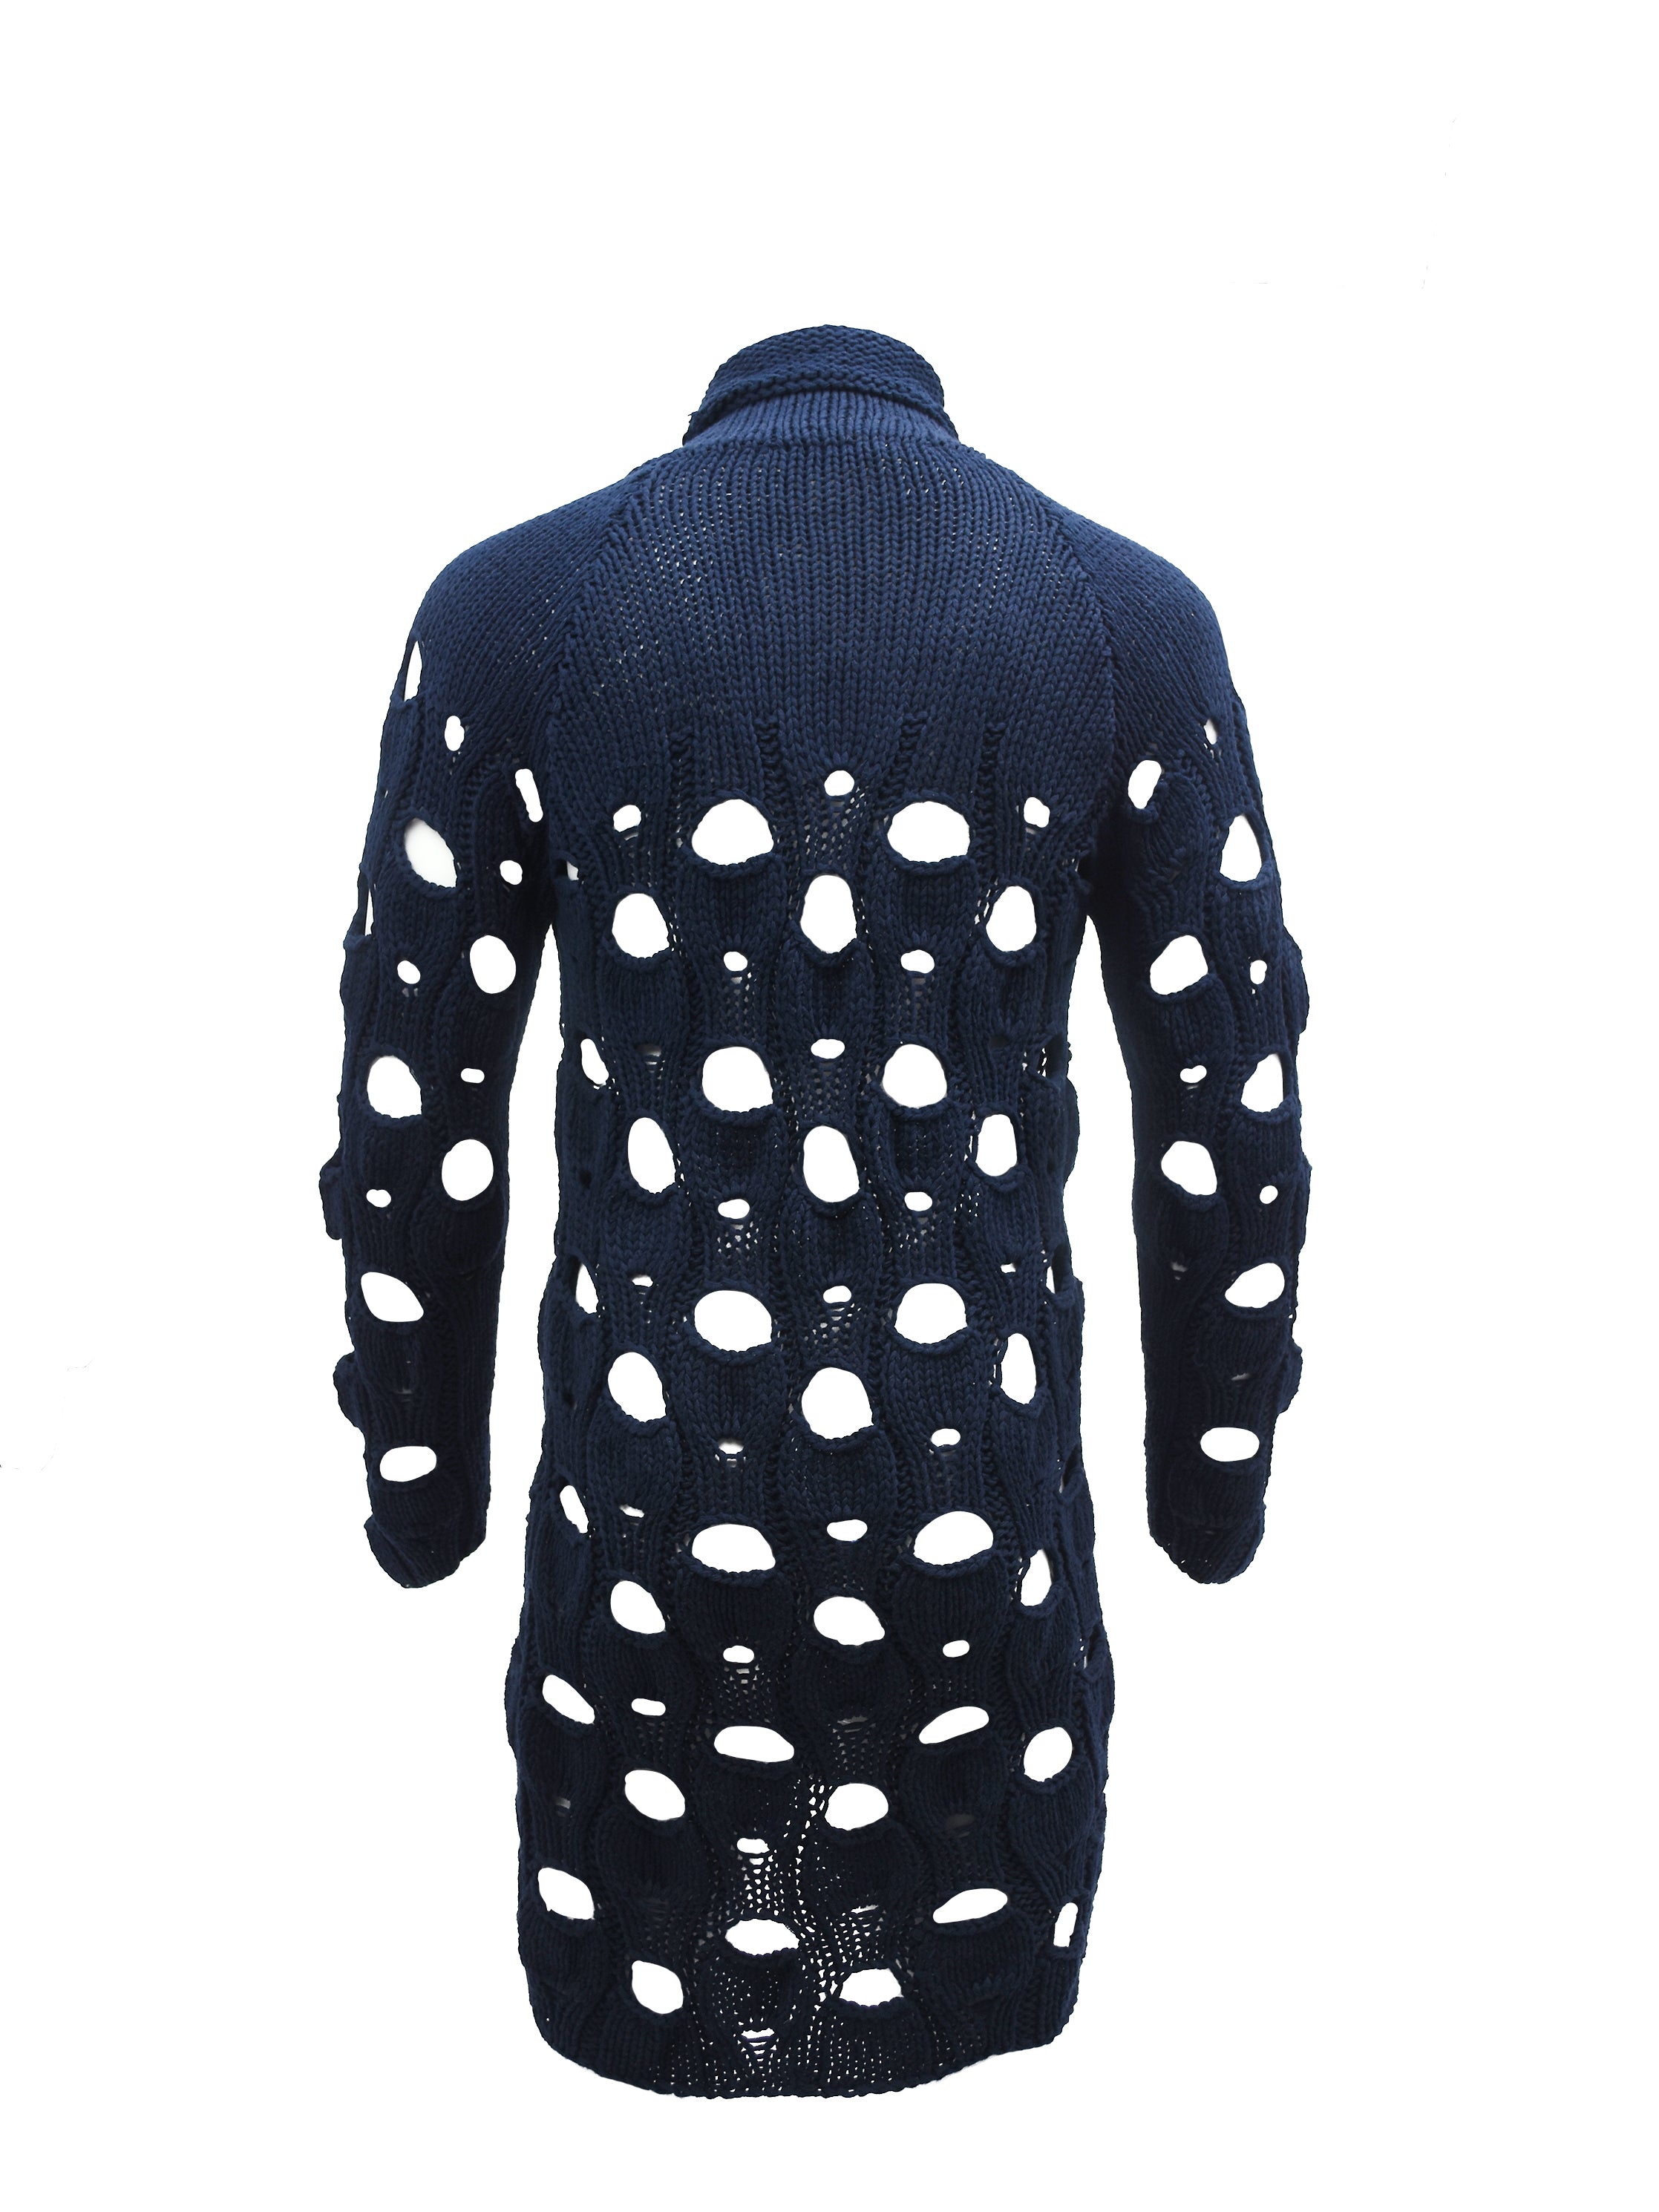 HOLEY KNIT CARDIGAN IN NAVY WITH SIDE ZIP